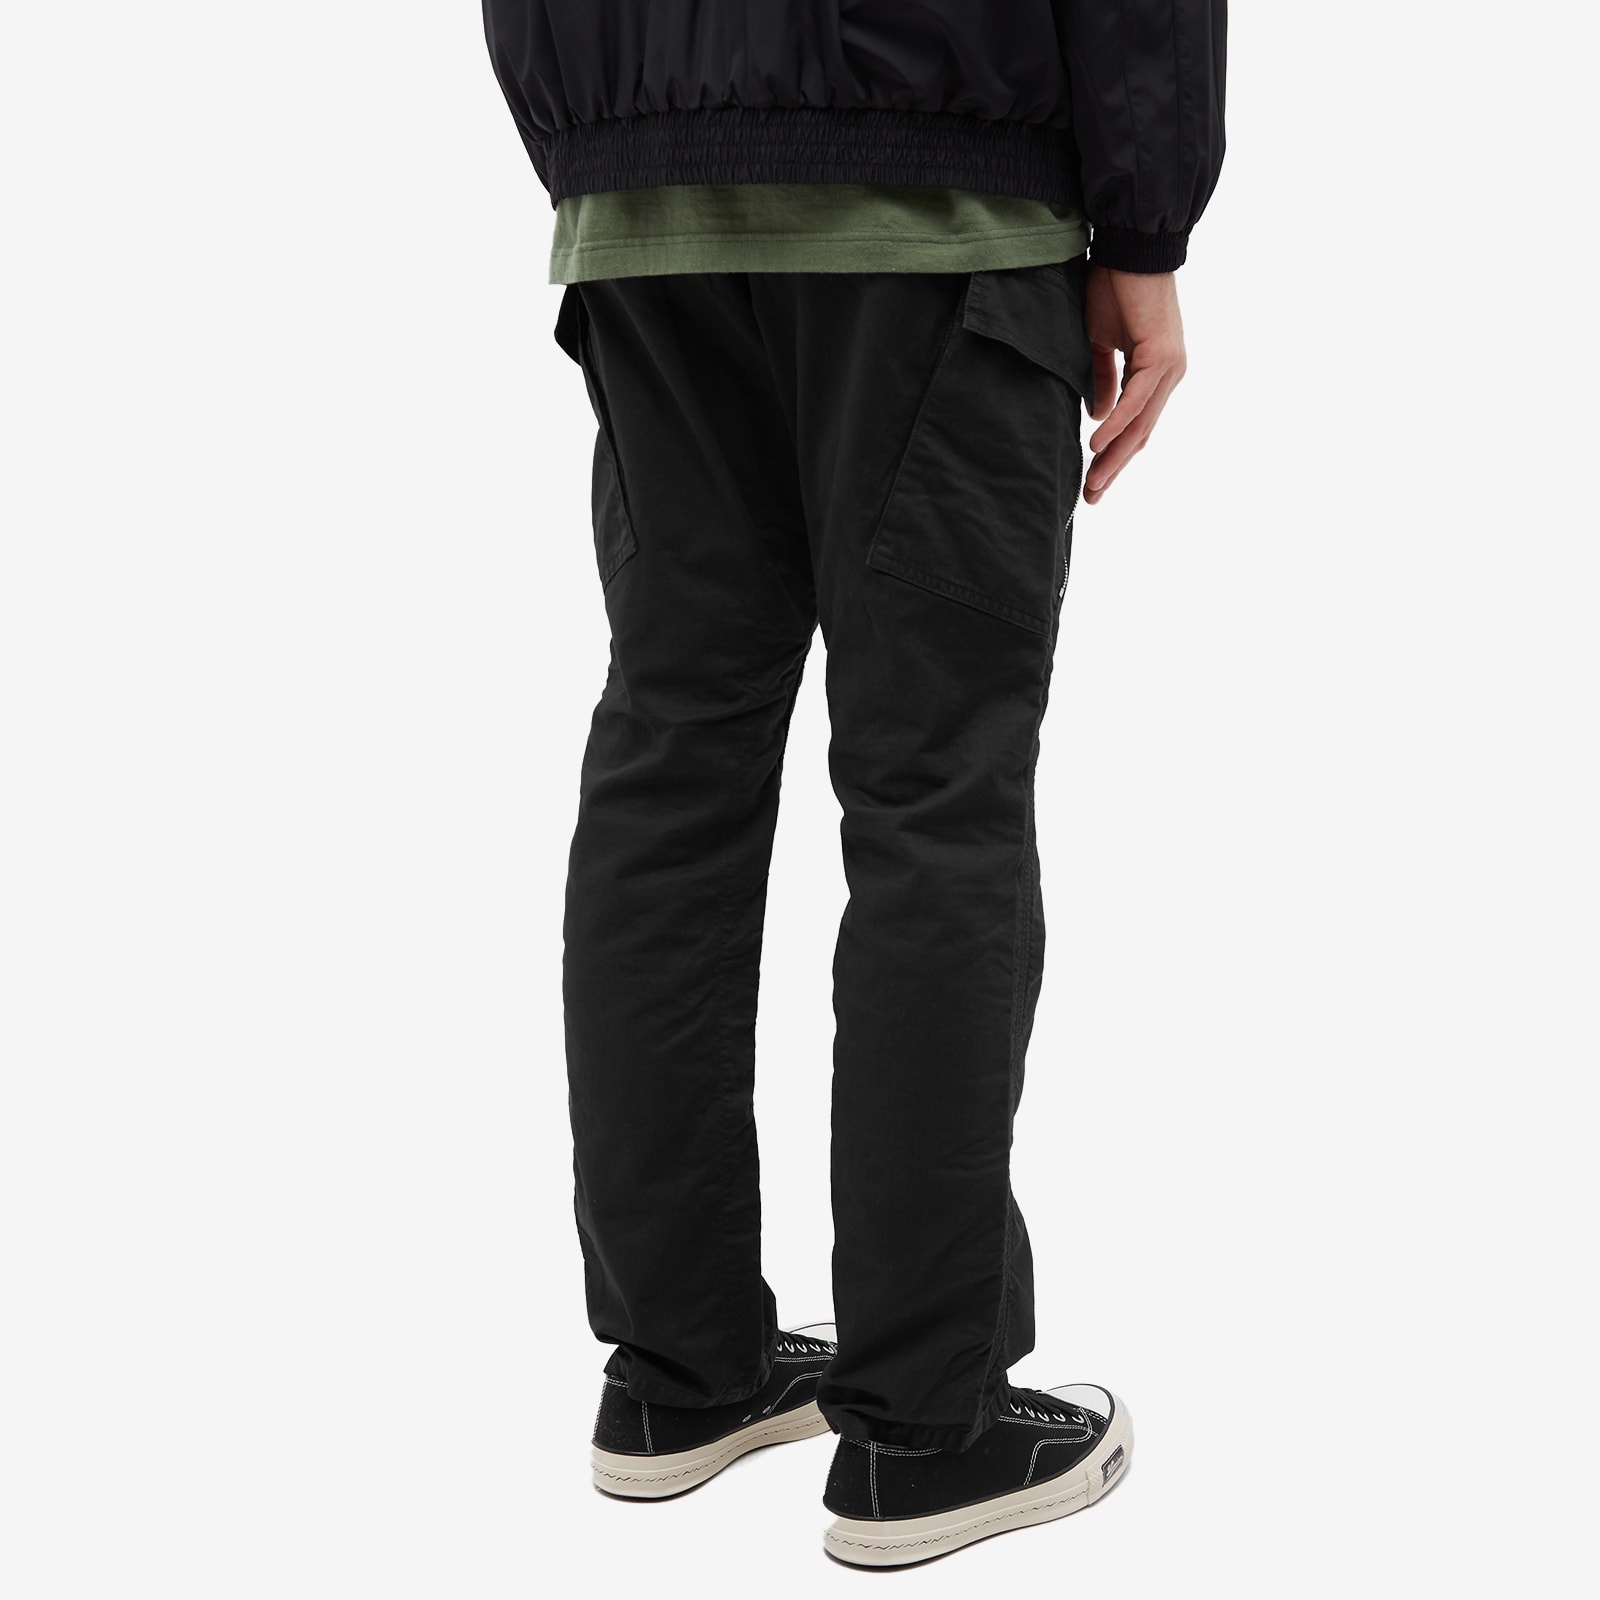 Nonnative Overdyed 6 Pocket Soldier Pants - 3